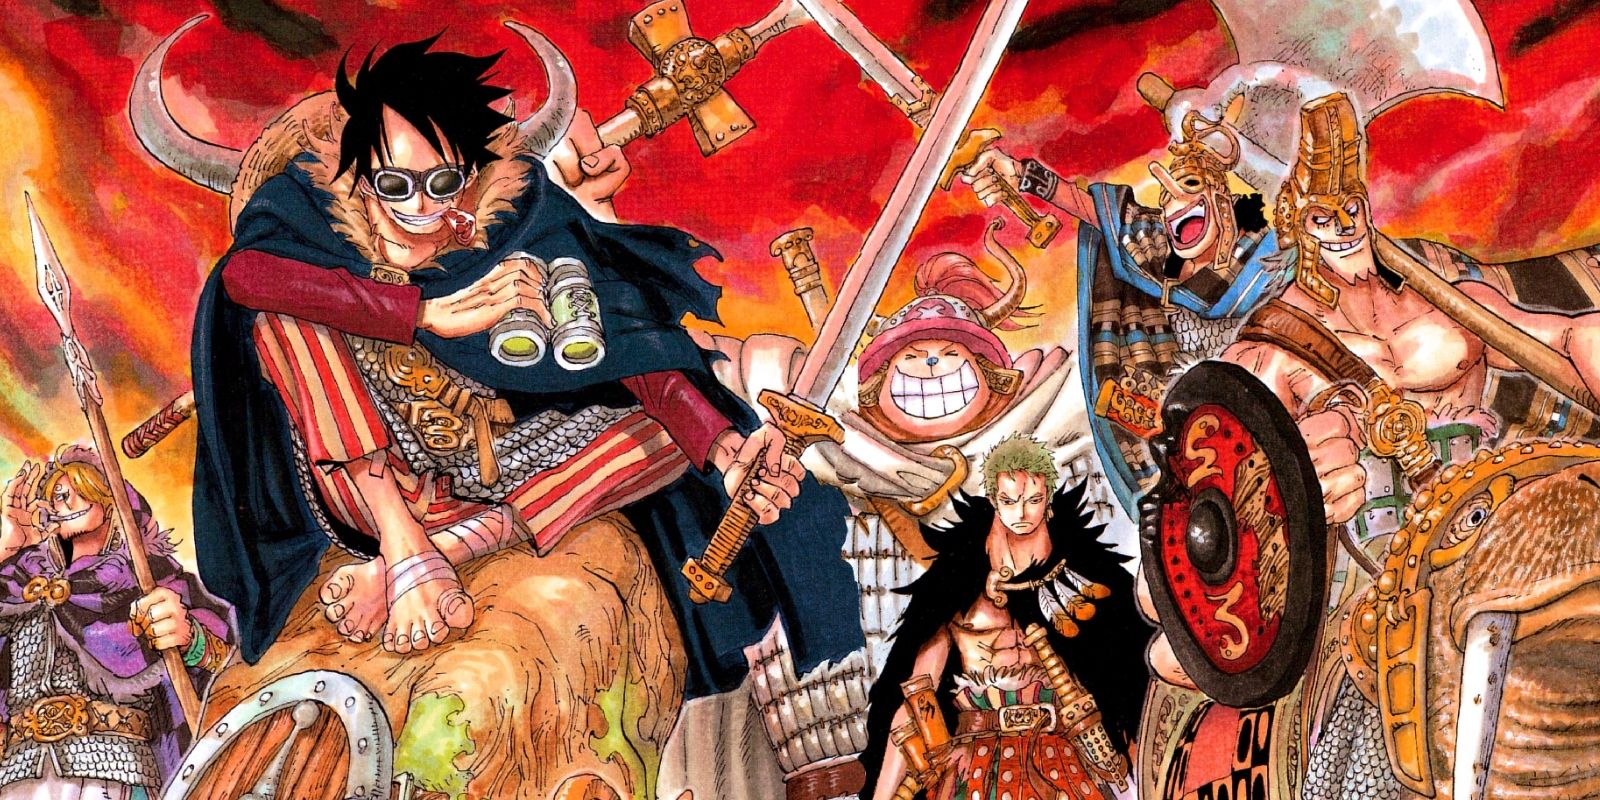 Chapter 446 artwork from the One Piece manga of Luffy and friends as vikings.